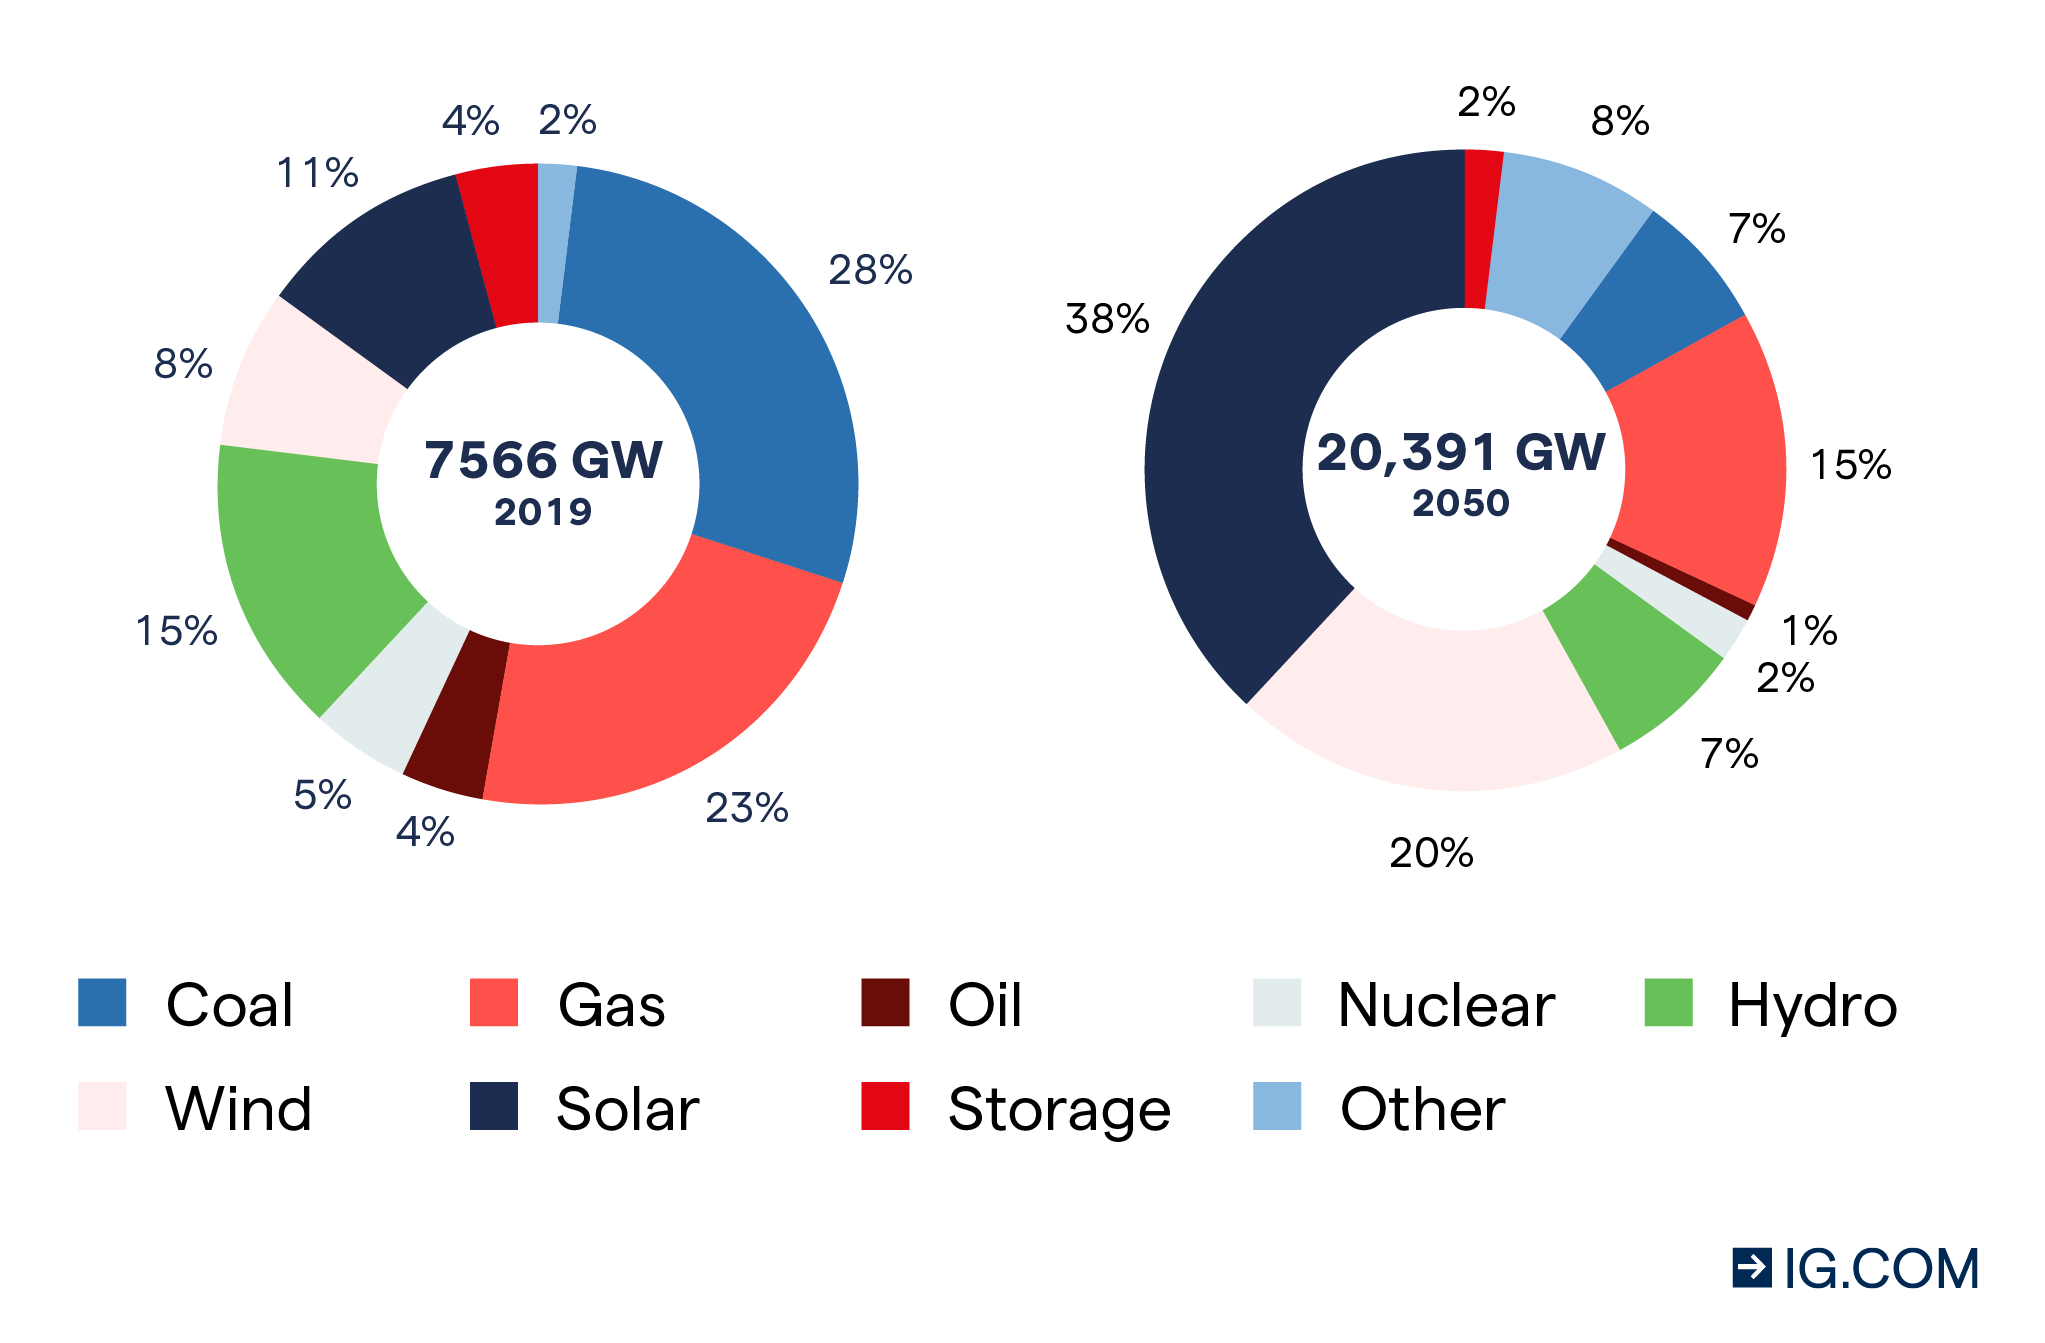 A pie chart forecast for the growth of sustainable energy source in the world distributed based on the 2019 market share compared to the predicted growth in 2050 for coal, gas, oil, nuclear, hydroelectric, wind, solar, storage and others.